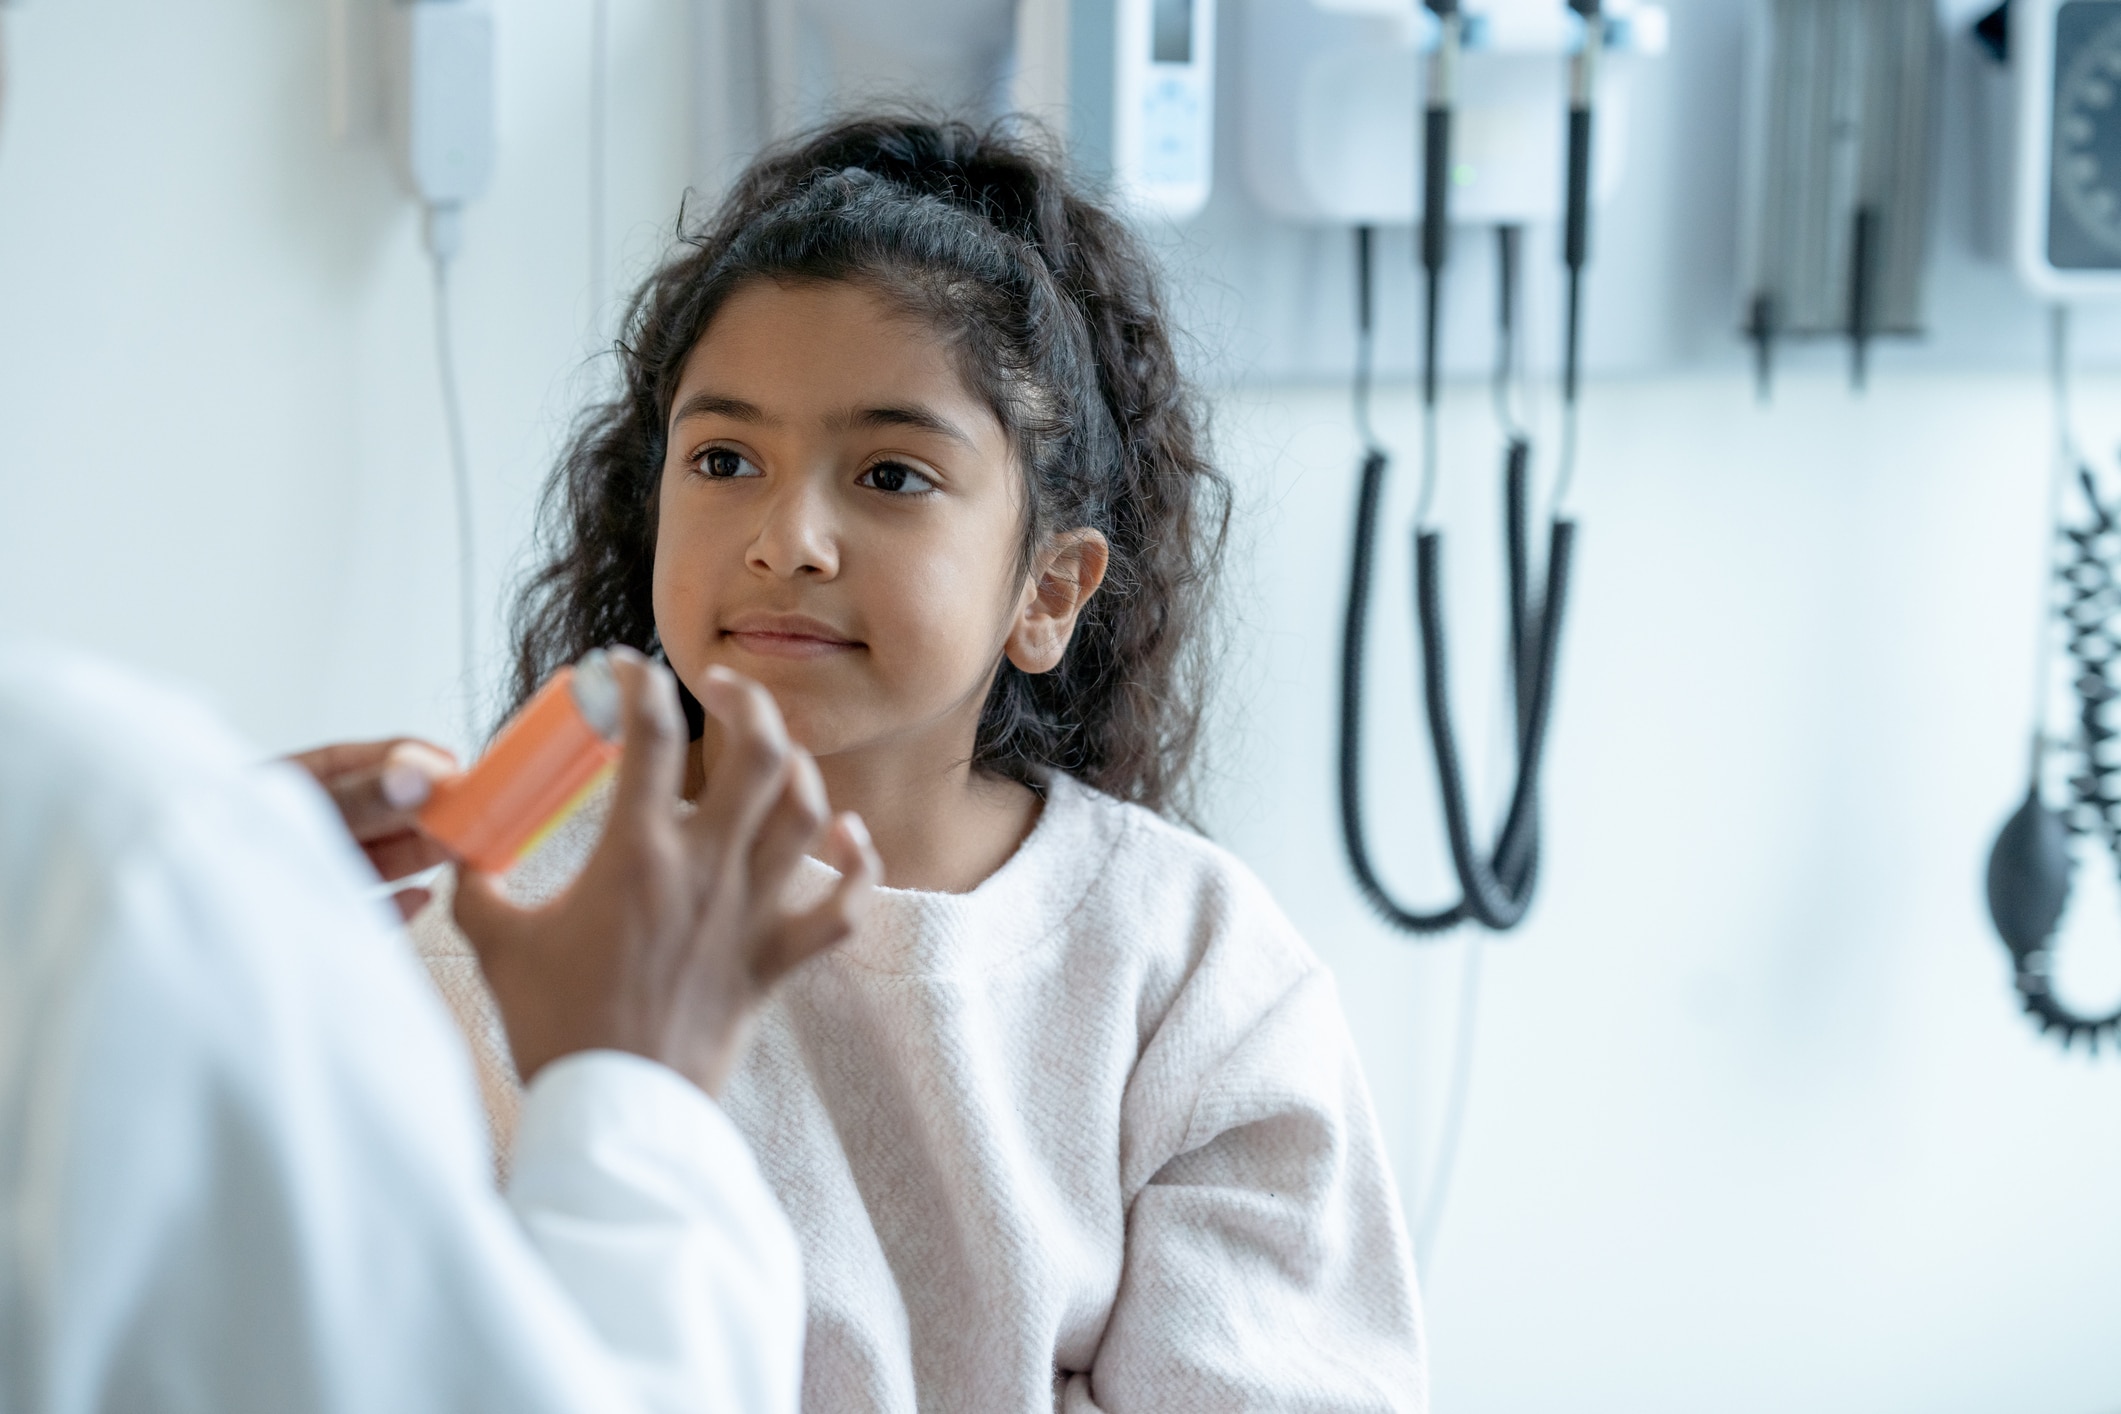 doctor handing an inhaler to a young girl patient who has asthma